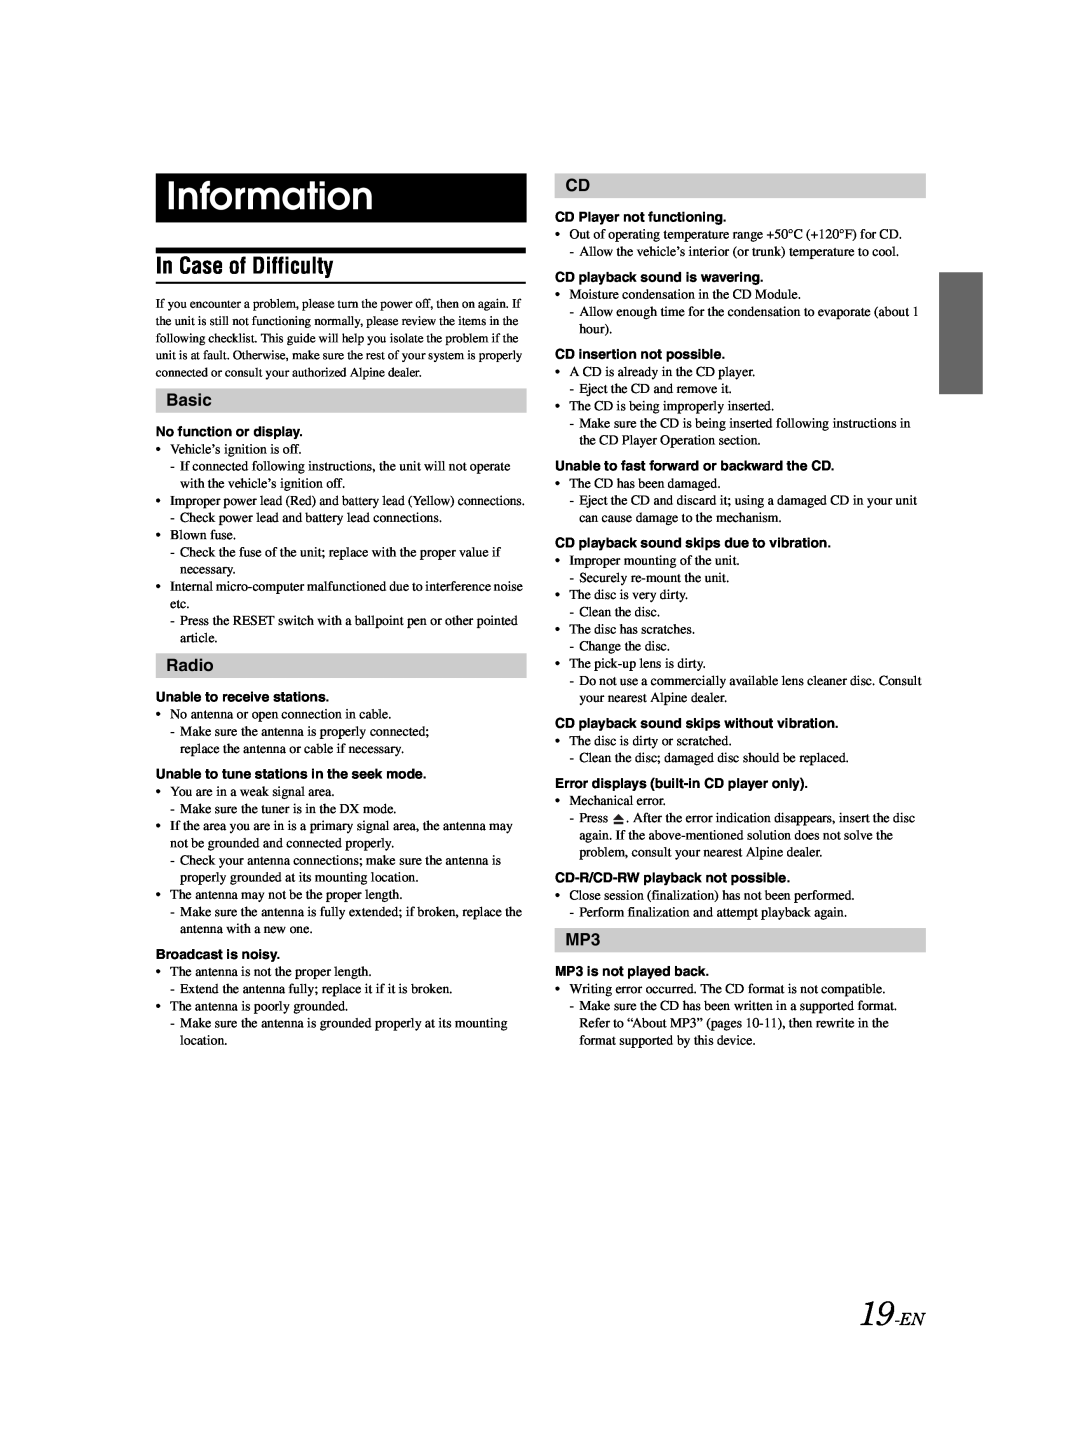 Alpine CDE-9870 owner manual Information, In Case of Difficulty, Basic, Radio, 19-EN 